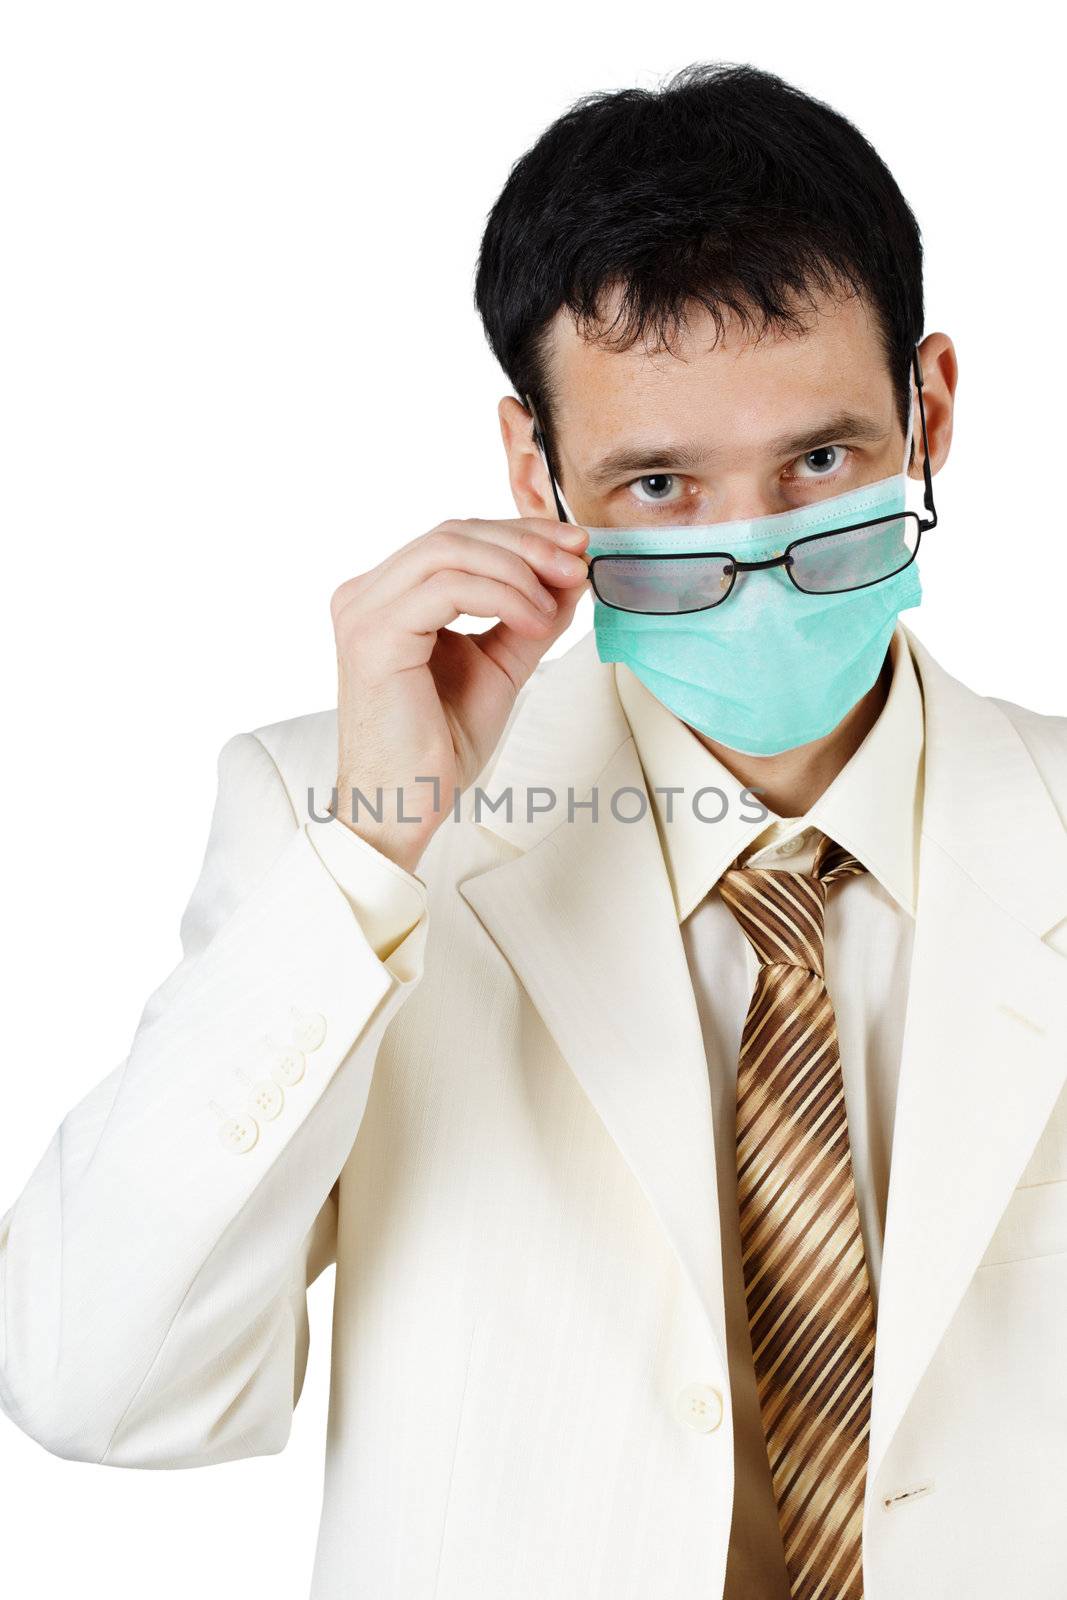 Doctor of Medical Sciences is looking over his glasses on white